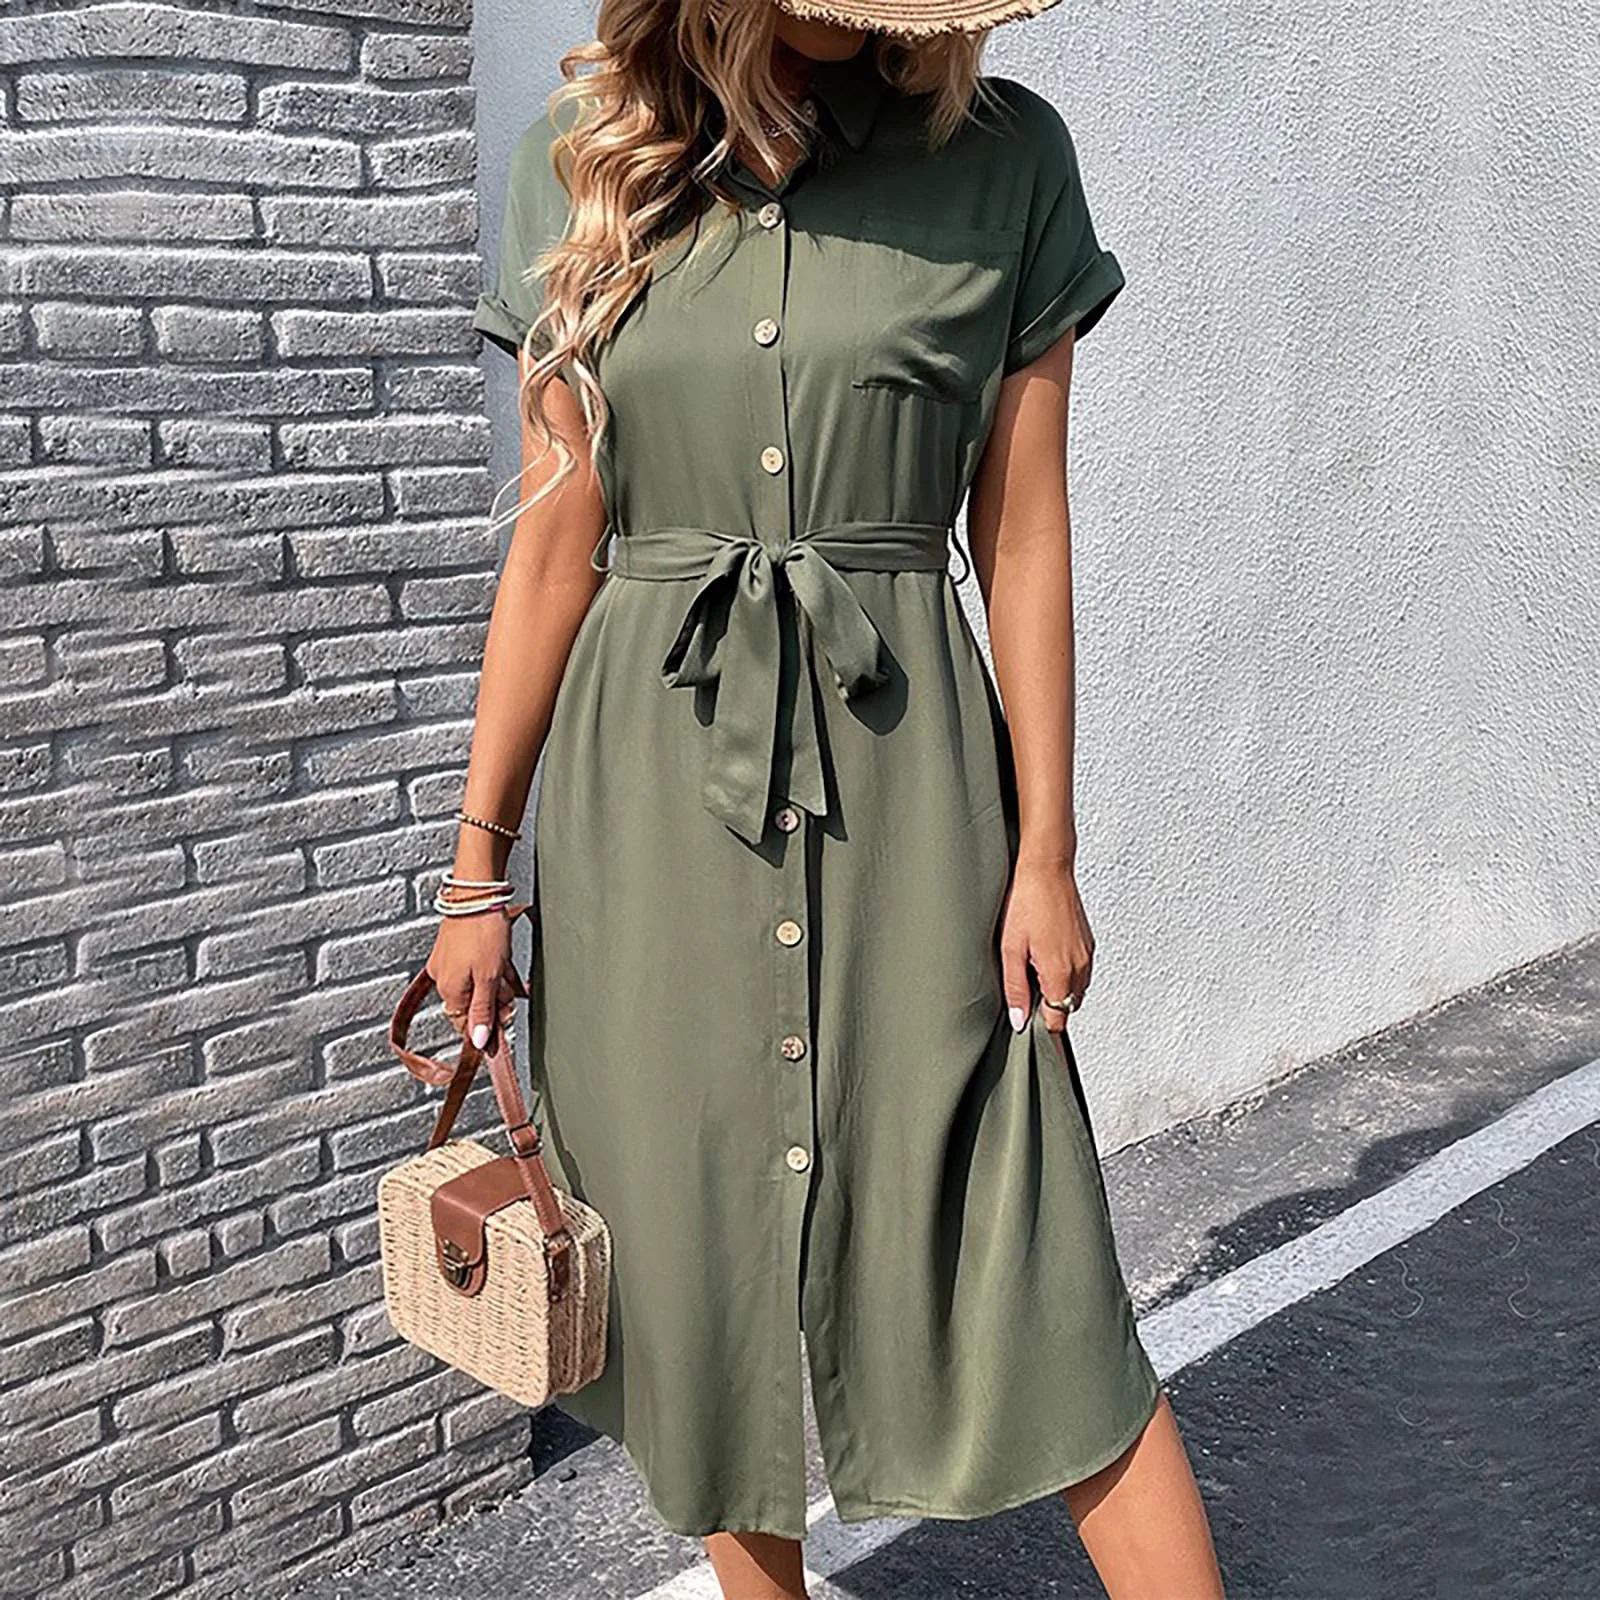 

Dress For Women Casual V Neck Solid Color Short Sleeve Botton Dress Casual Dress Womens Tan Utility Dress